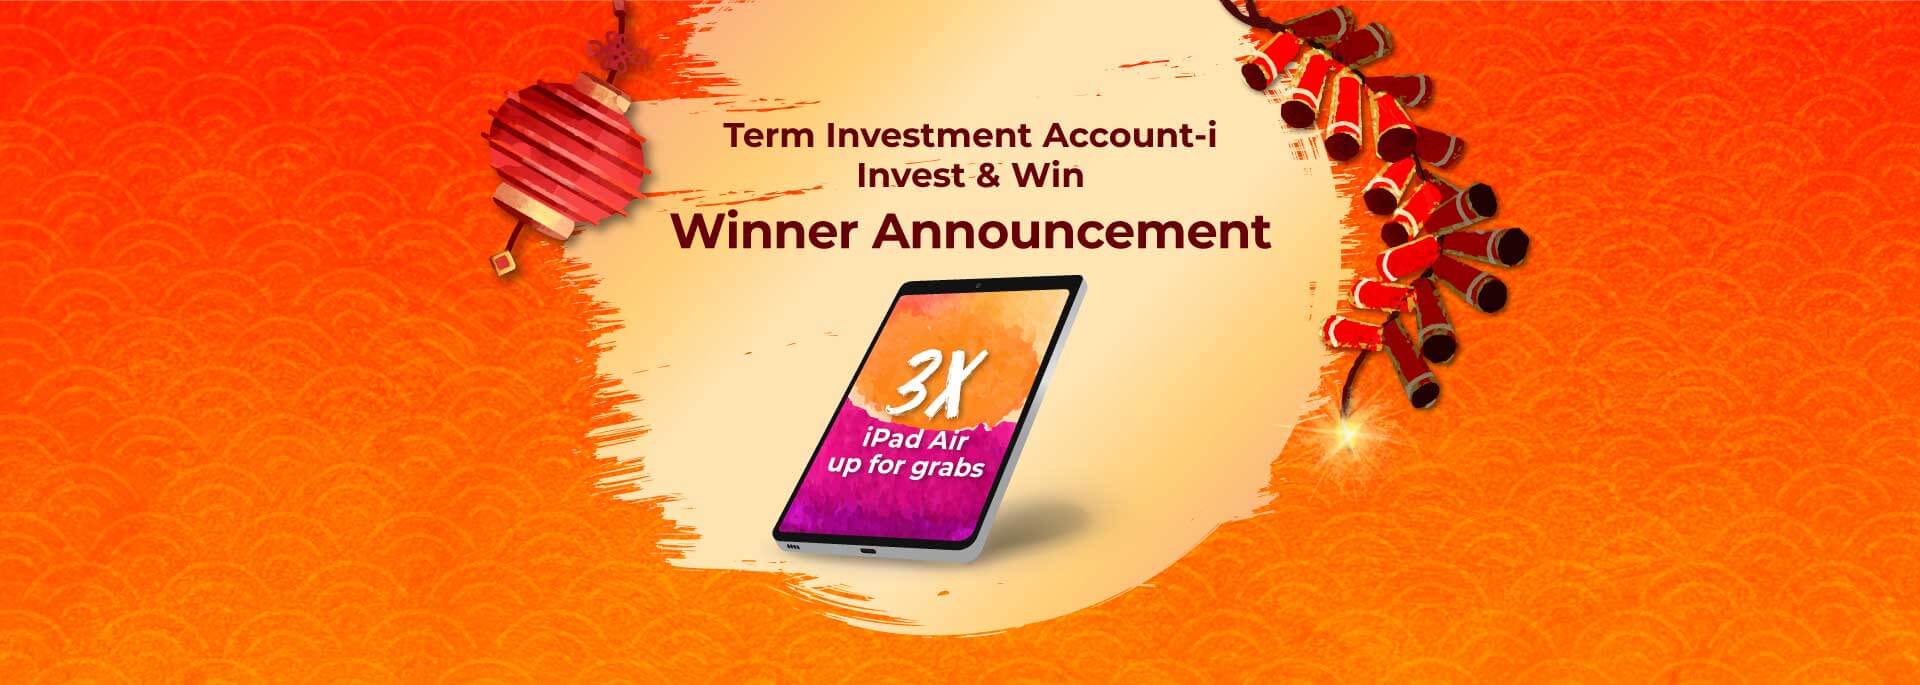 Term Investment Account-i Invest & Win - Winner Announcement